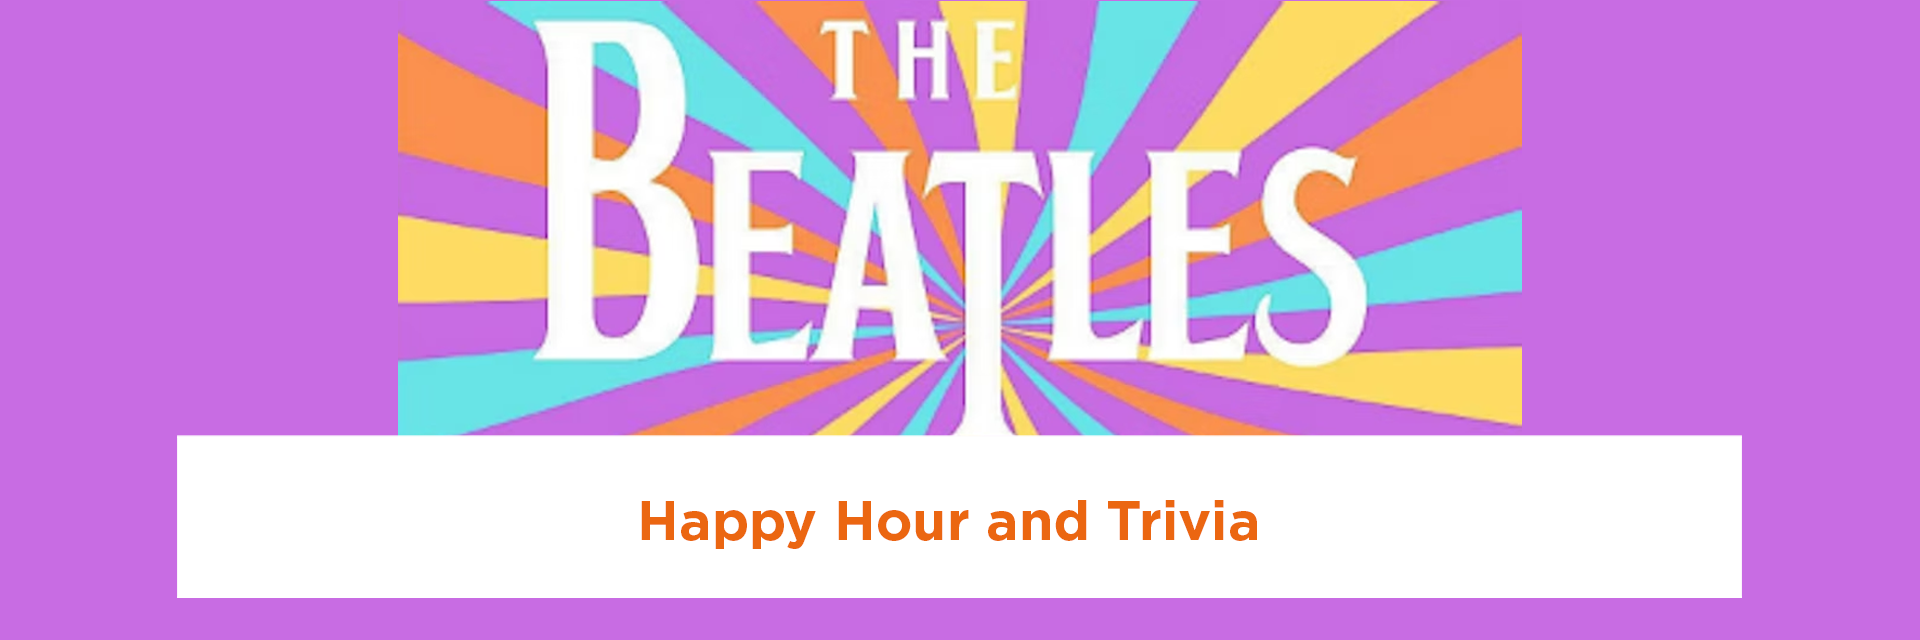 Beatles-Happy Hour and Trivia